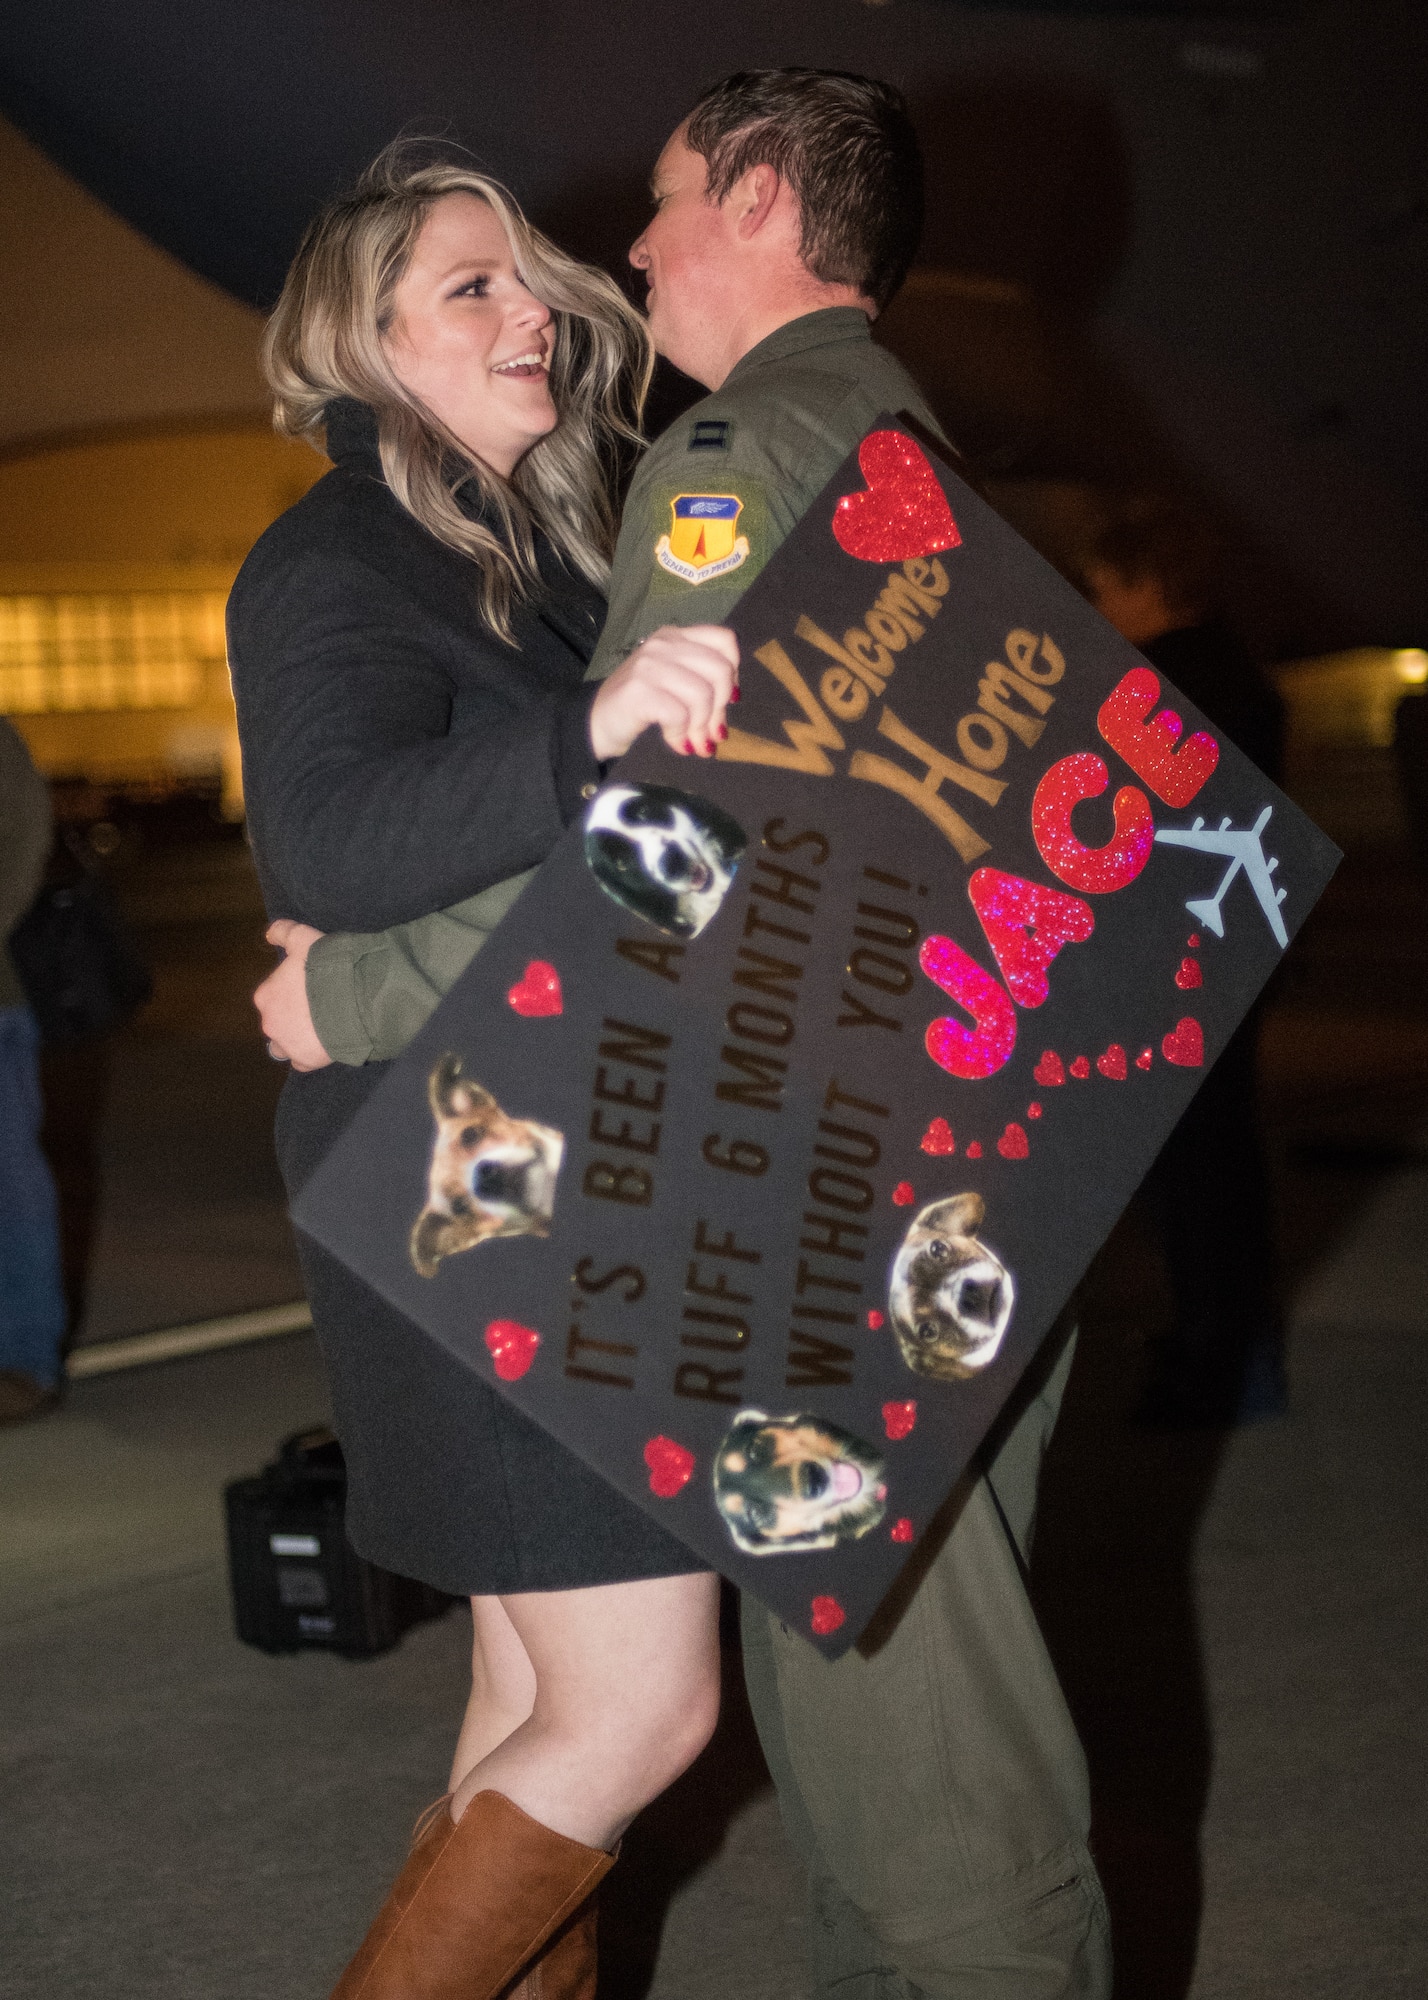 Capt. Jace Muehlenthaler, 96th Bomb Squadron weapons system officer, embraces his wife after returning from a deployment at Barksdale Air Force Base, La., Jan. 16, 2019. Muehlenthaler and his team deployed to Andersen Air Force Base, Guam for six months in support of Continuous Bomber Presence. (U.S. Air Force photo by Airman 1st Class Lillian Miller)